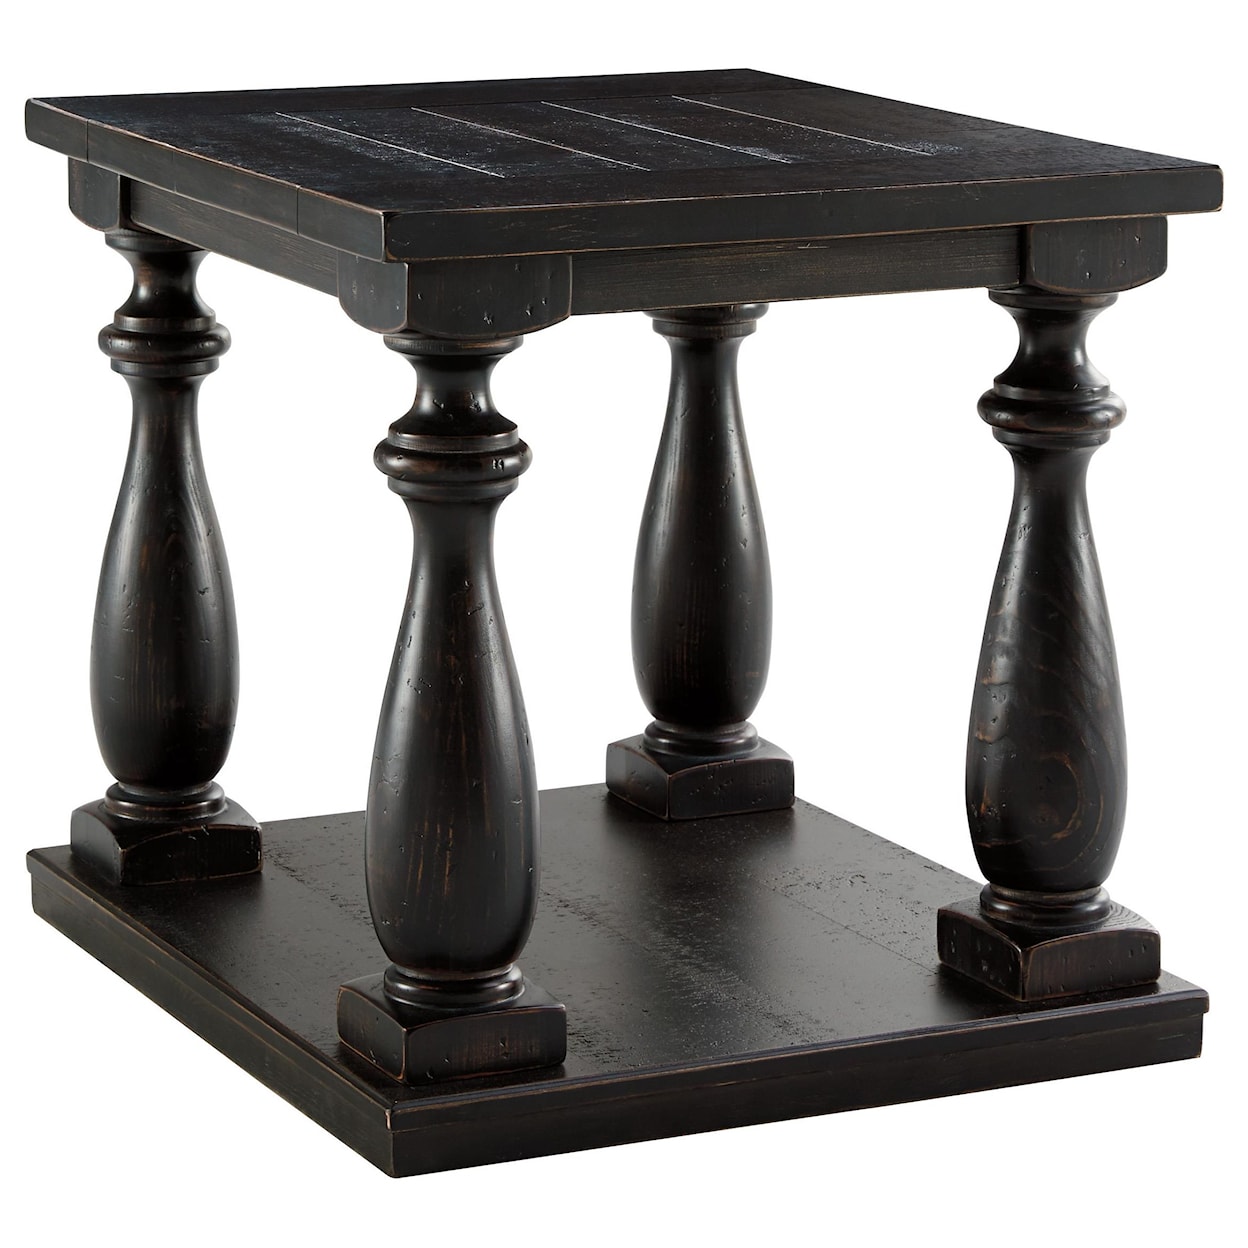 Signature Design by Ashley Mallacar Coctail Table and End Table Set